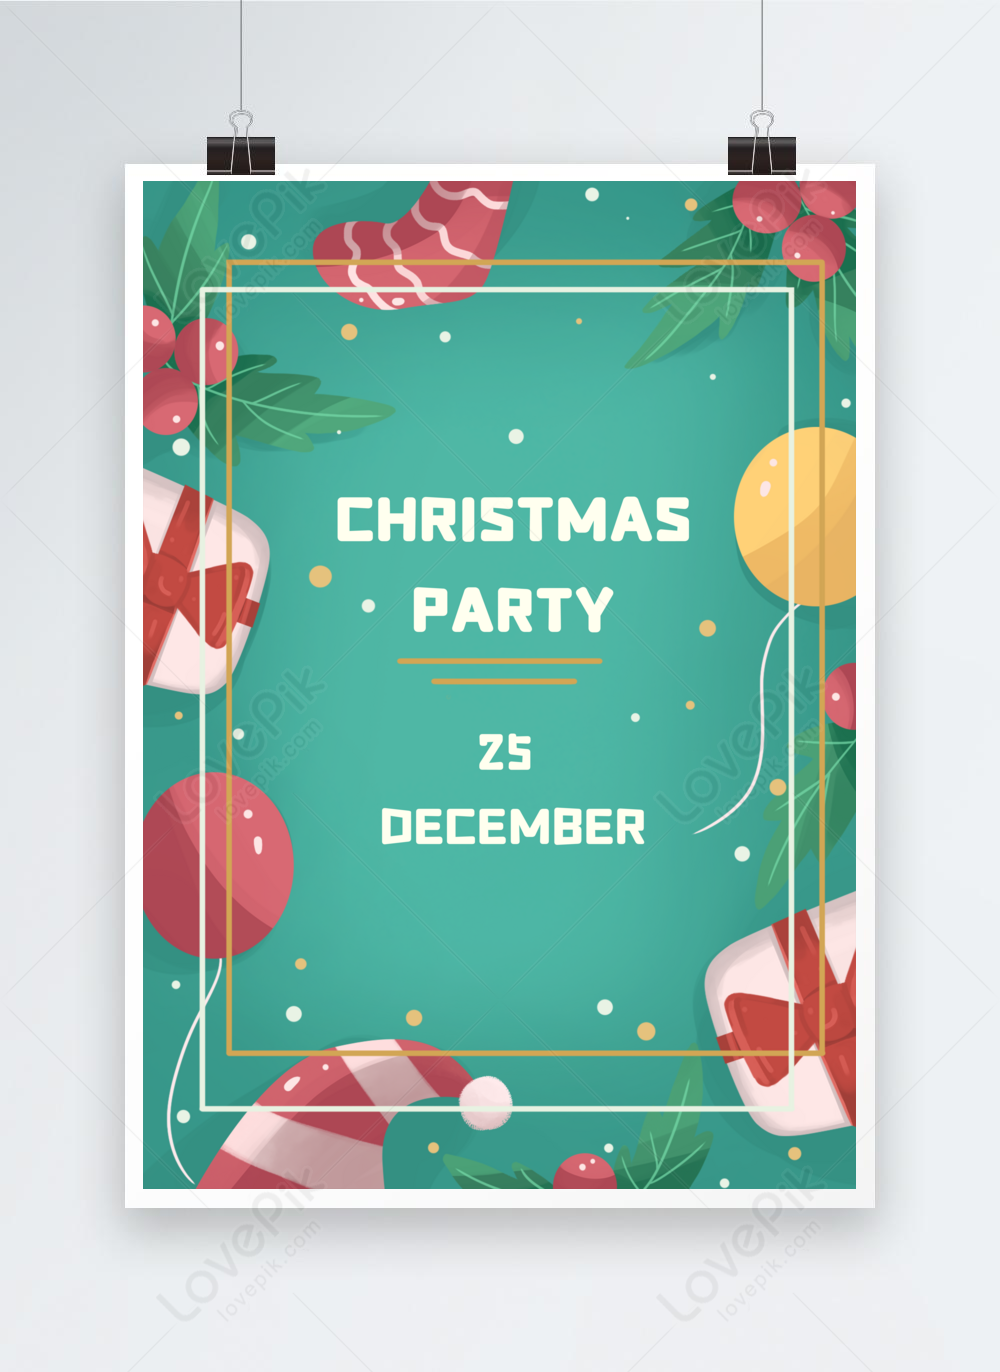 Cartoon Poster Of Christmas Party Template Image picture Free Download 